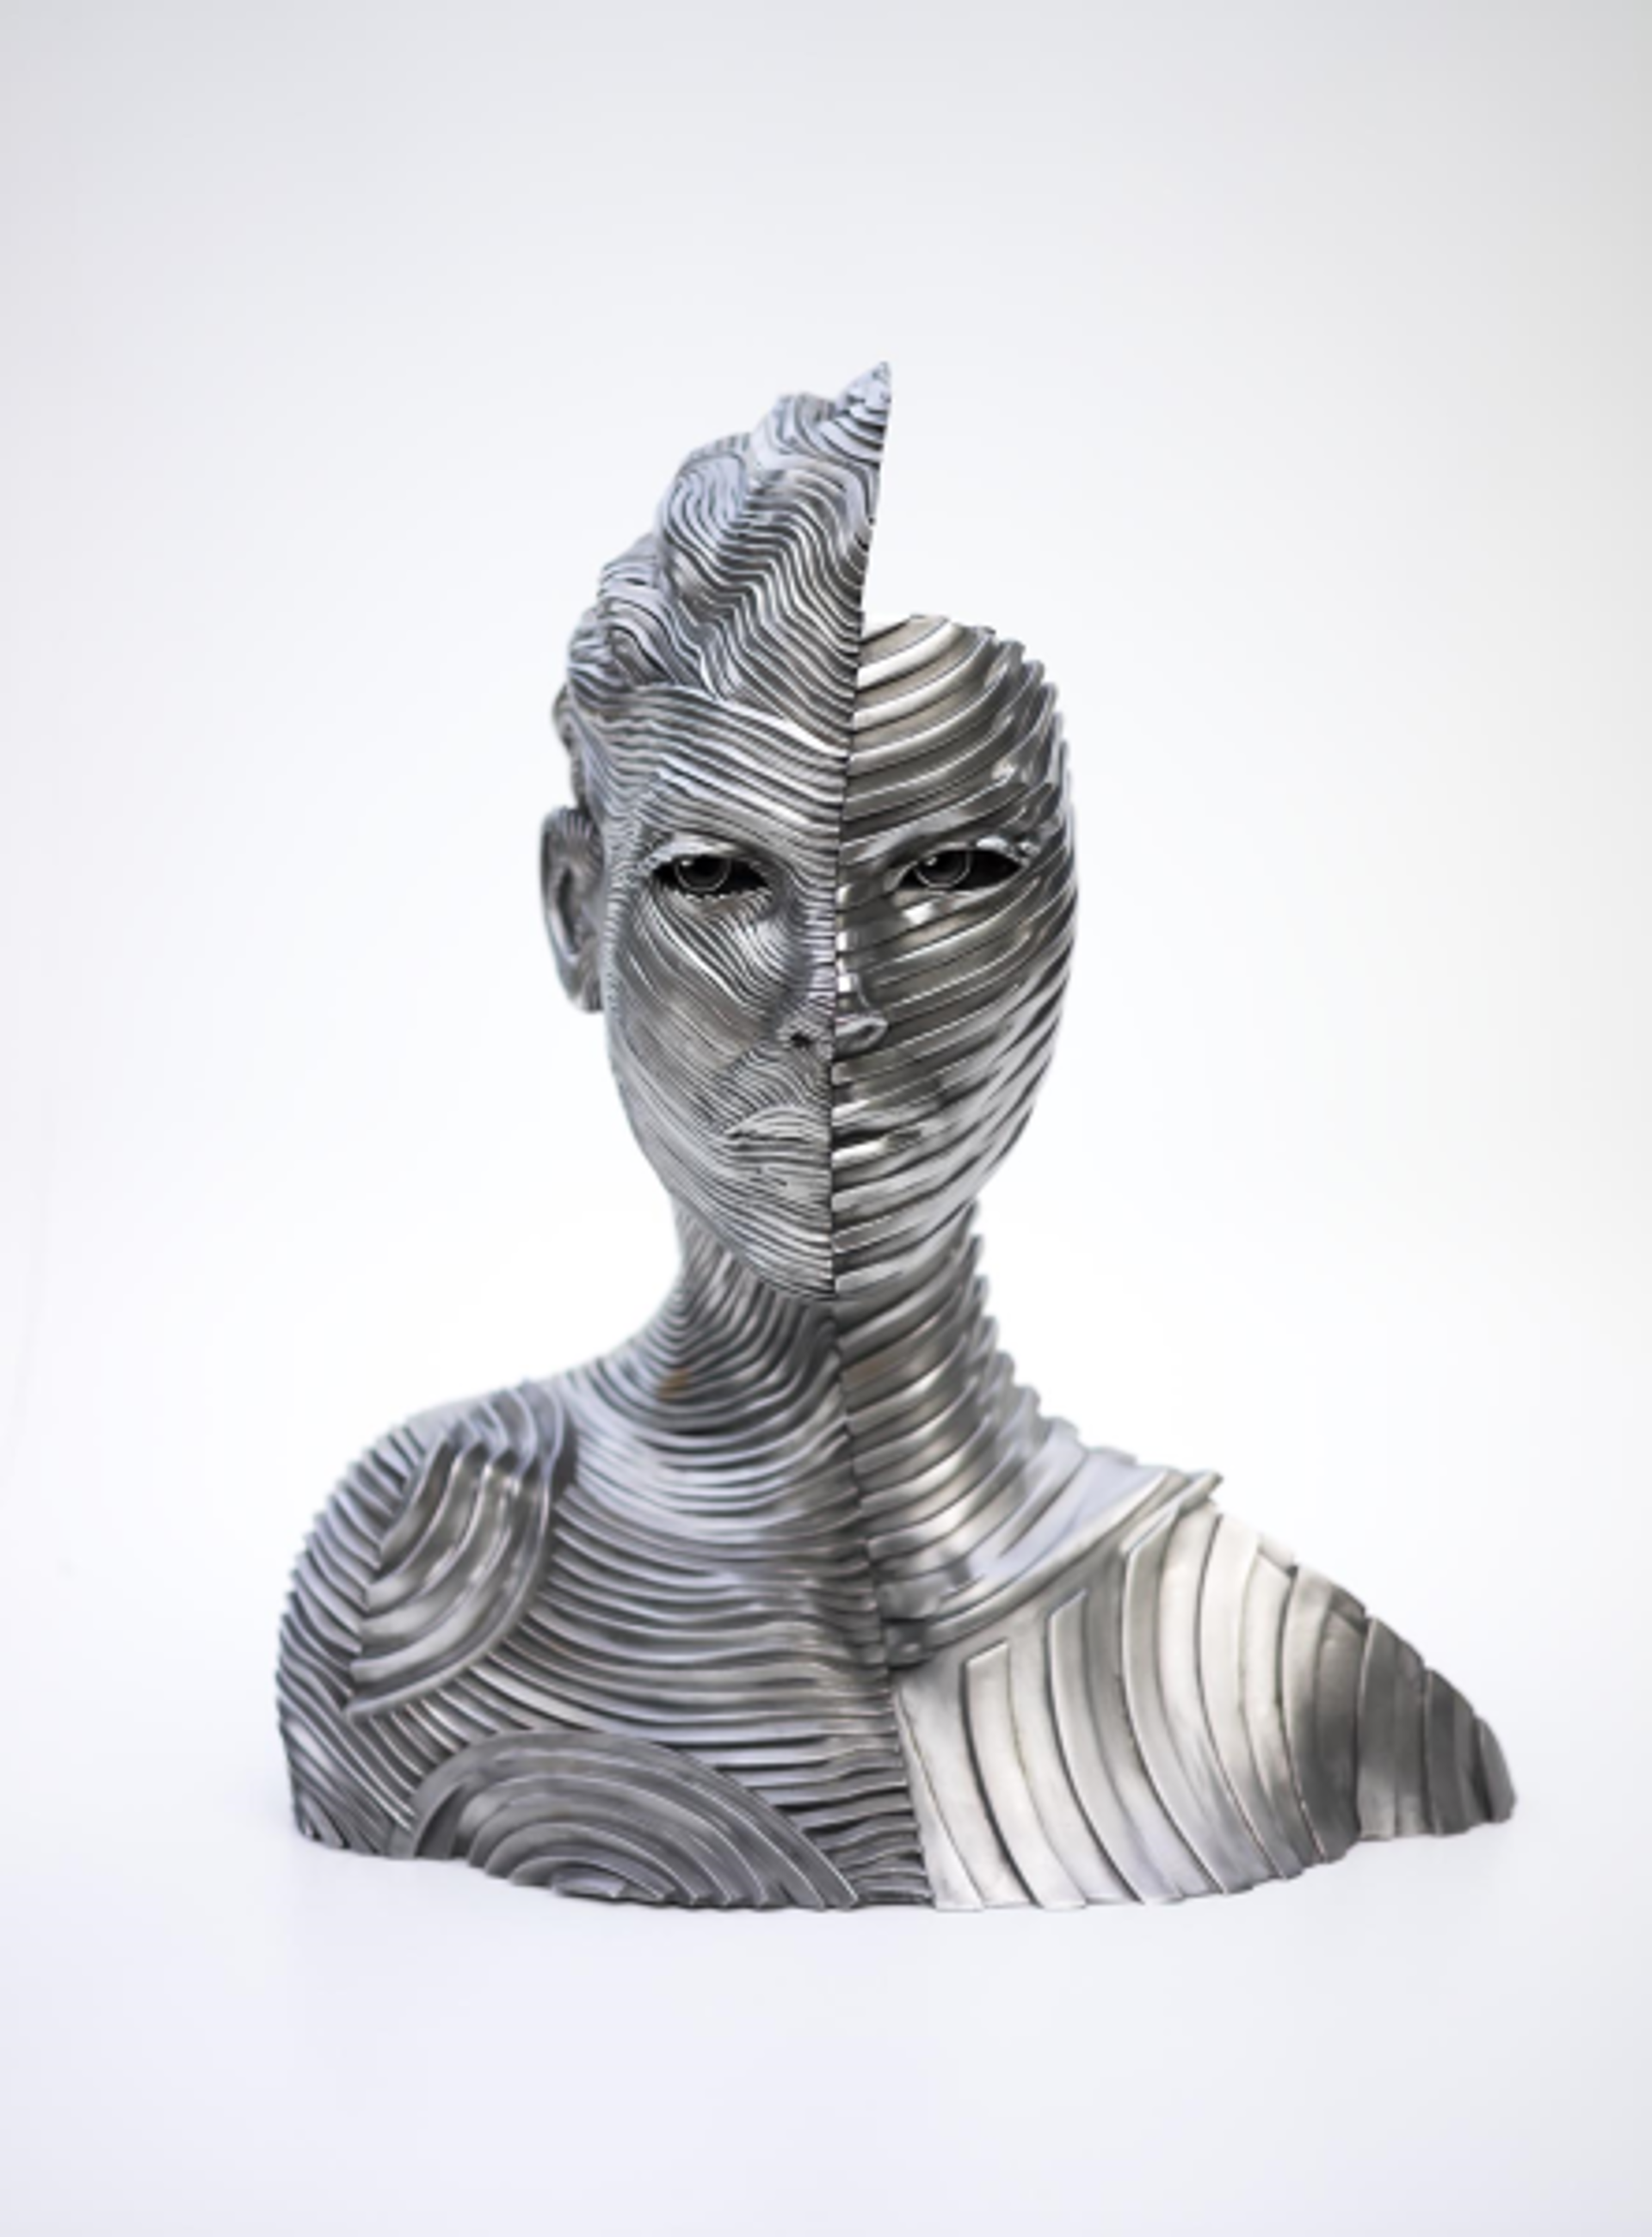 My Mirror Remains by Gil Bruvel